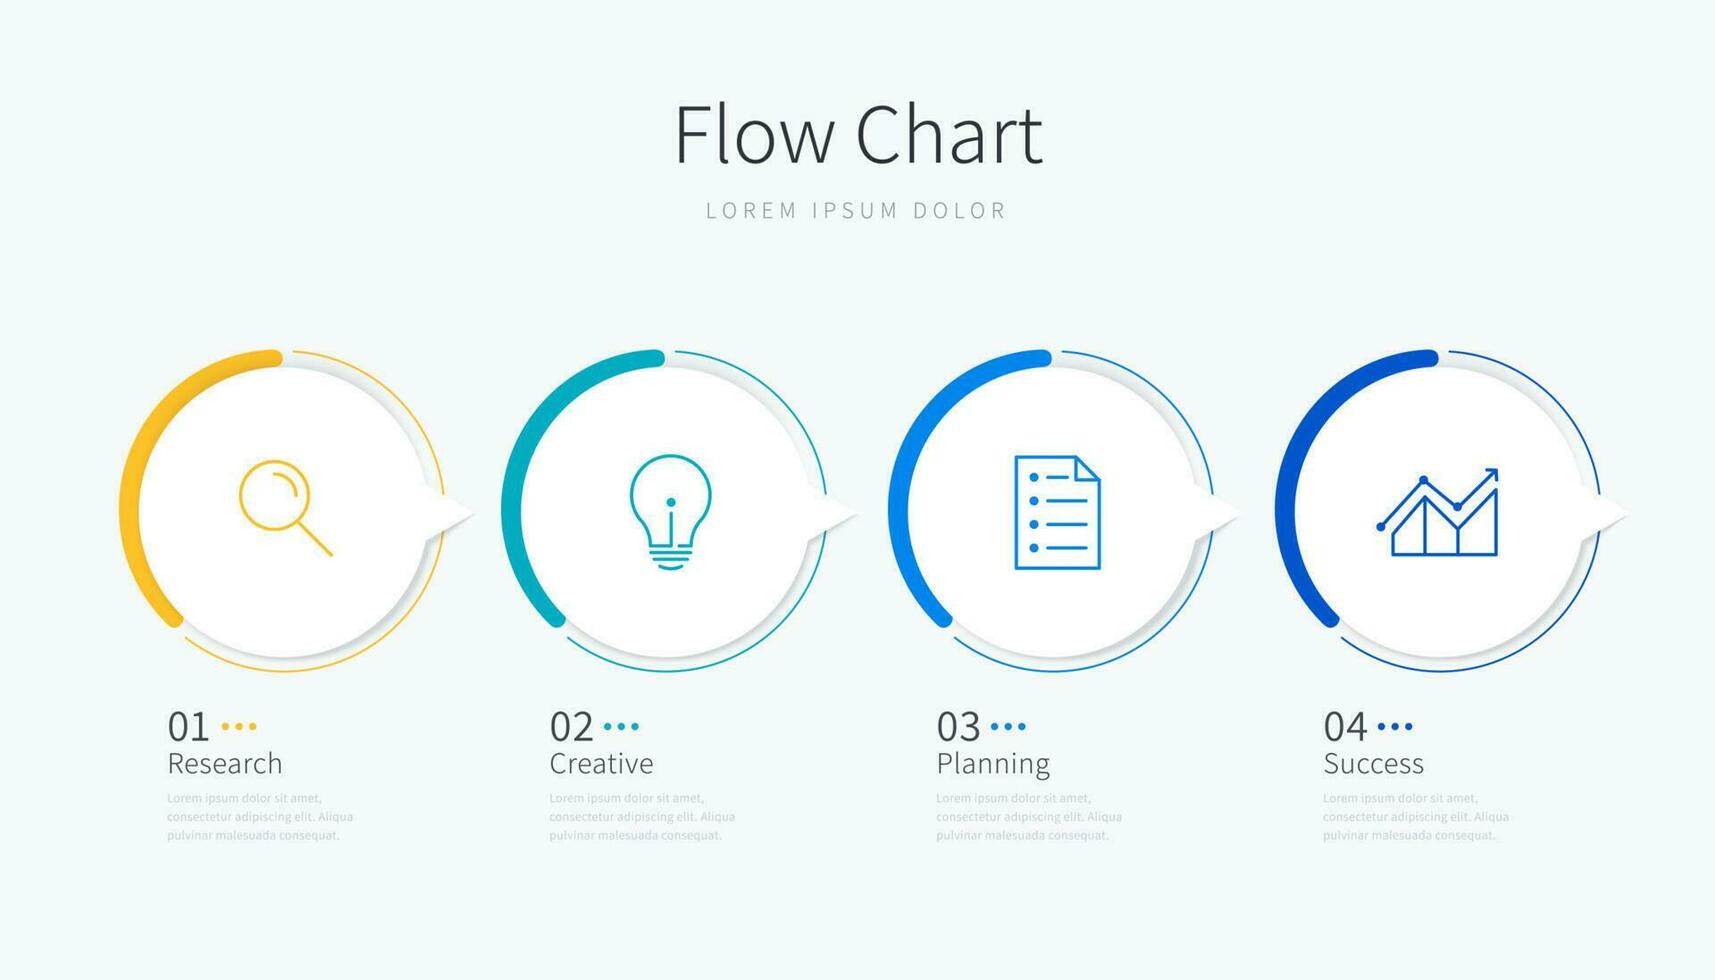 Flow chart infographic template with design elements and icons vector